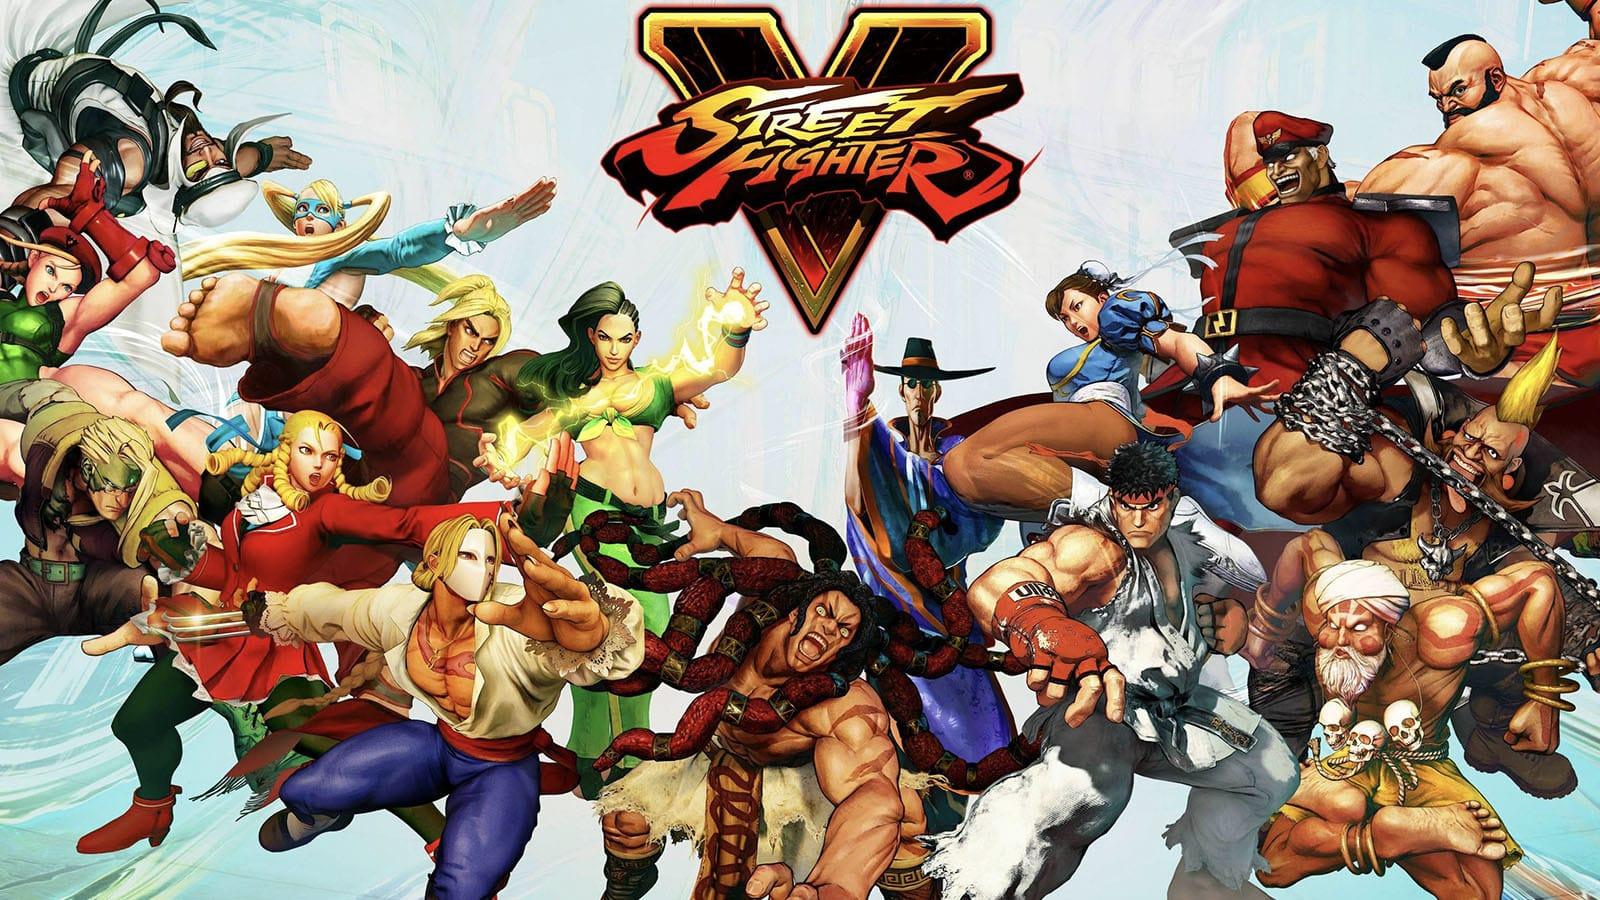 Street Fighter 5’s roster 